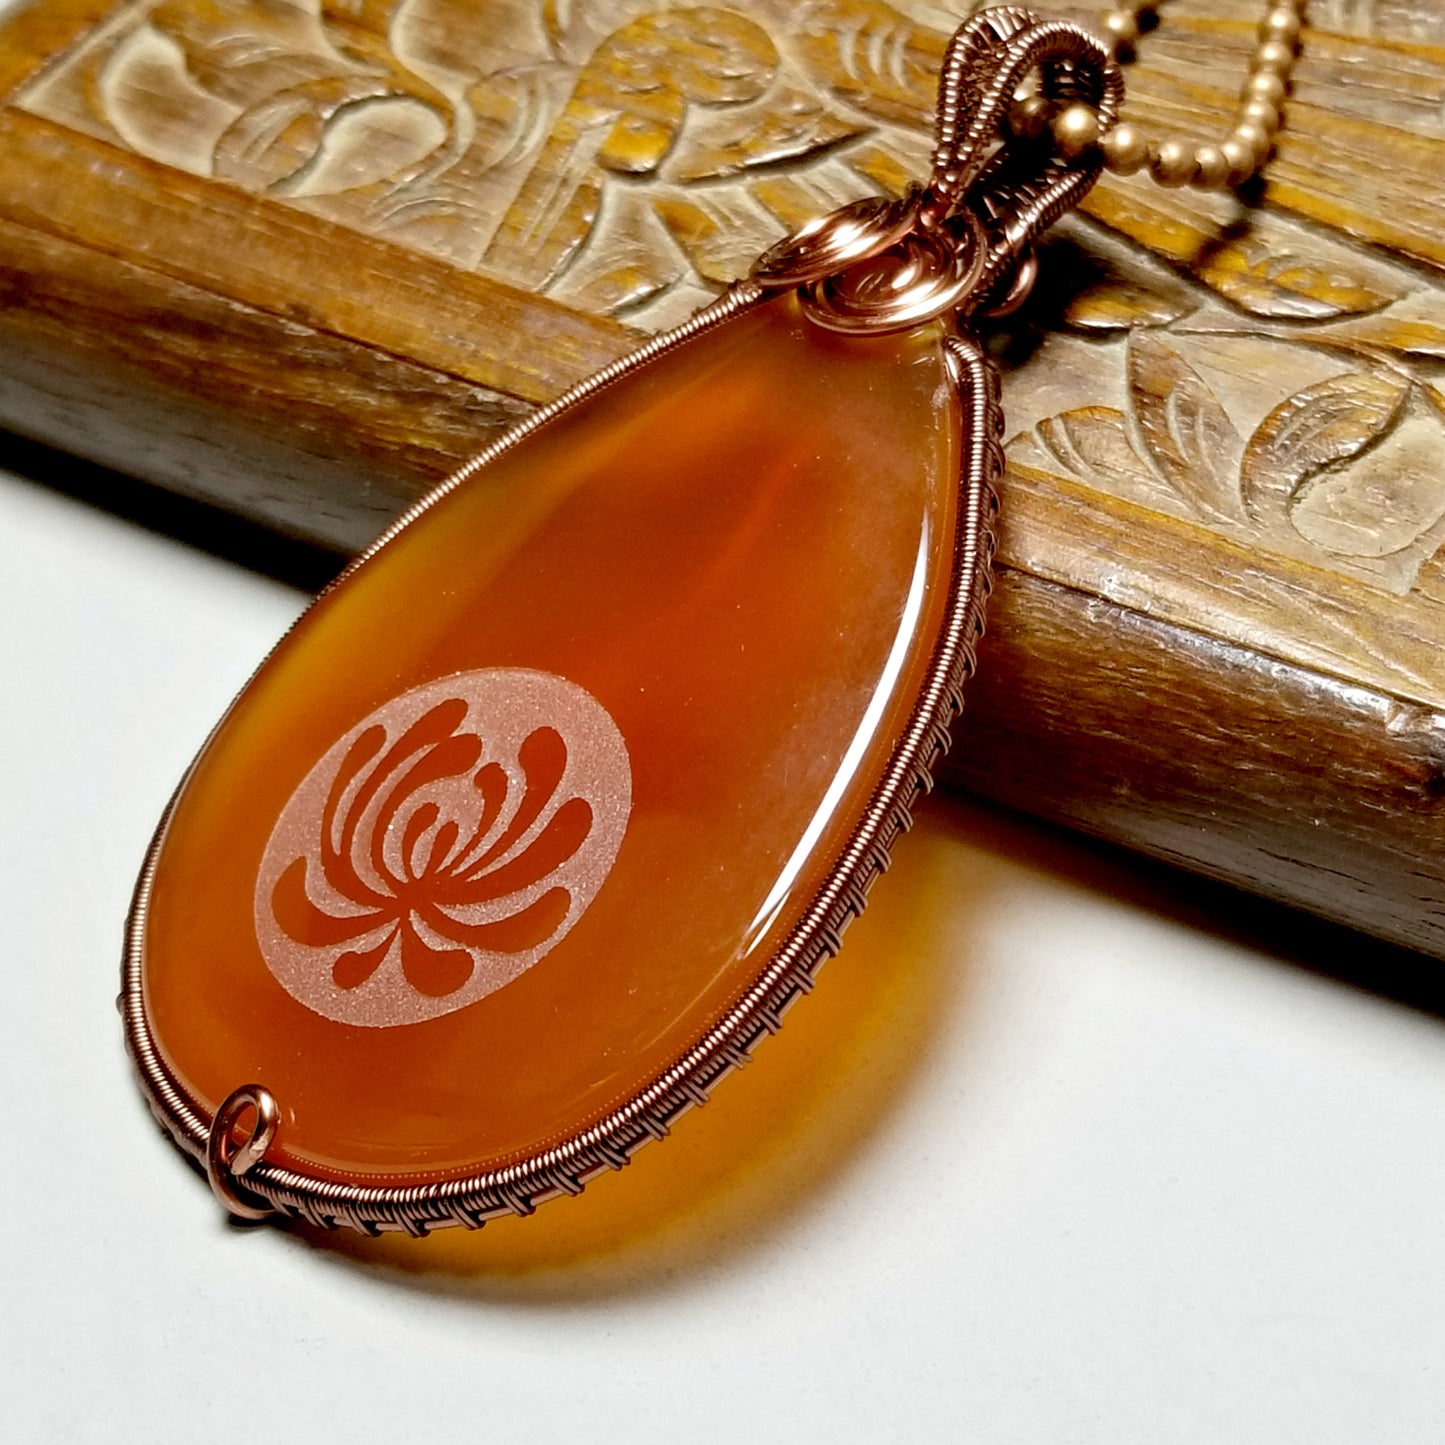 Large Etched Teardrop Stone Necklace, Healing Jewelry